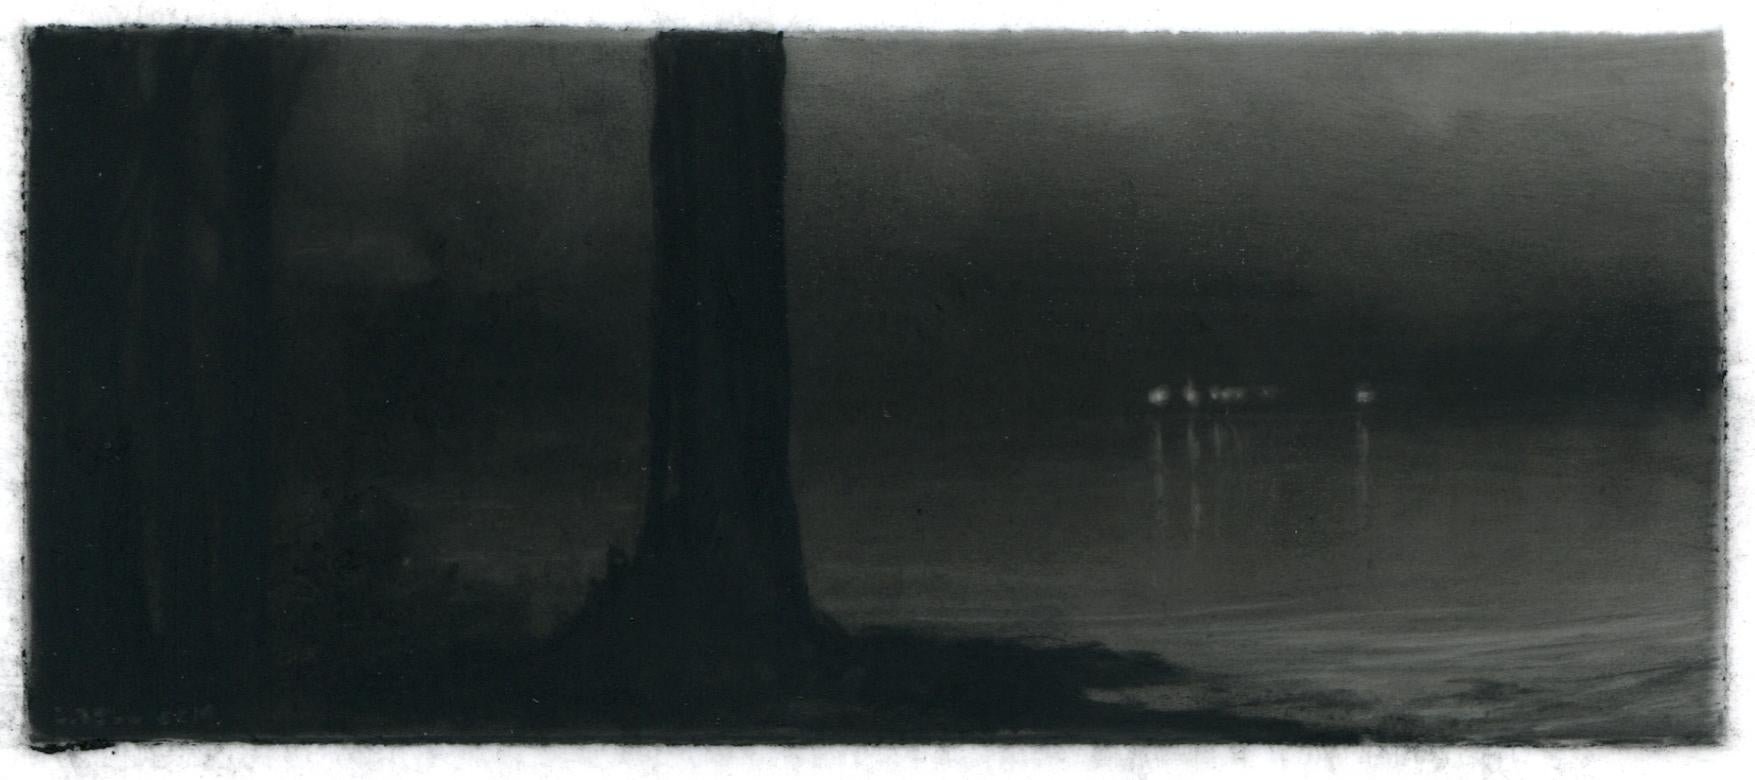 Dozier Bell Landscape Art - Night cove, realist black and white charcoal landscape drawing